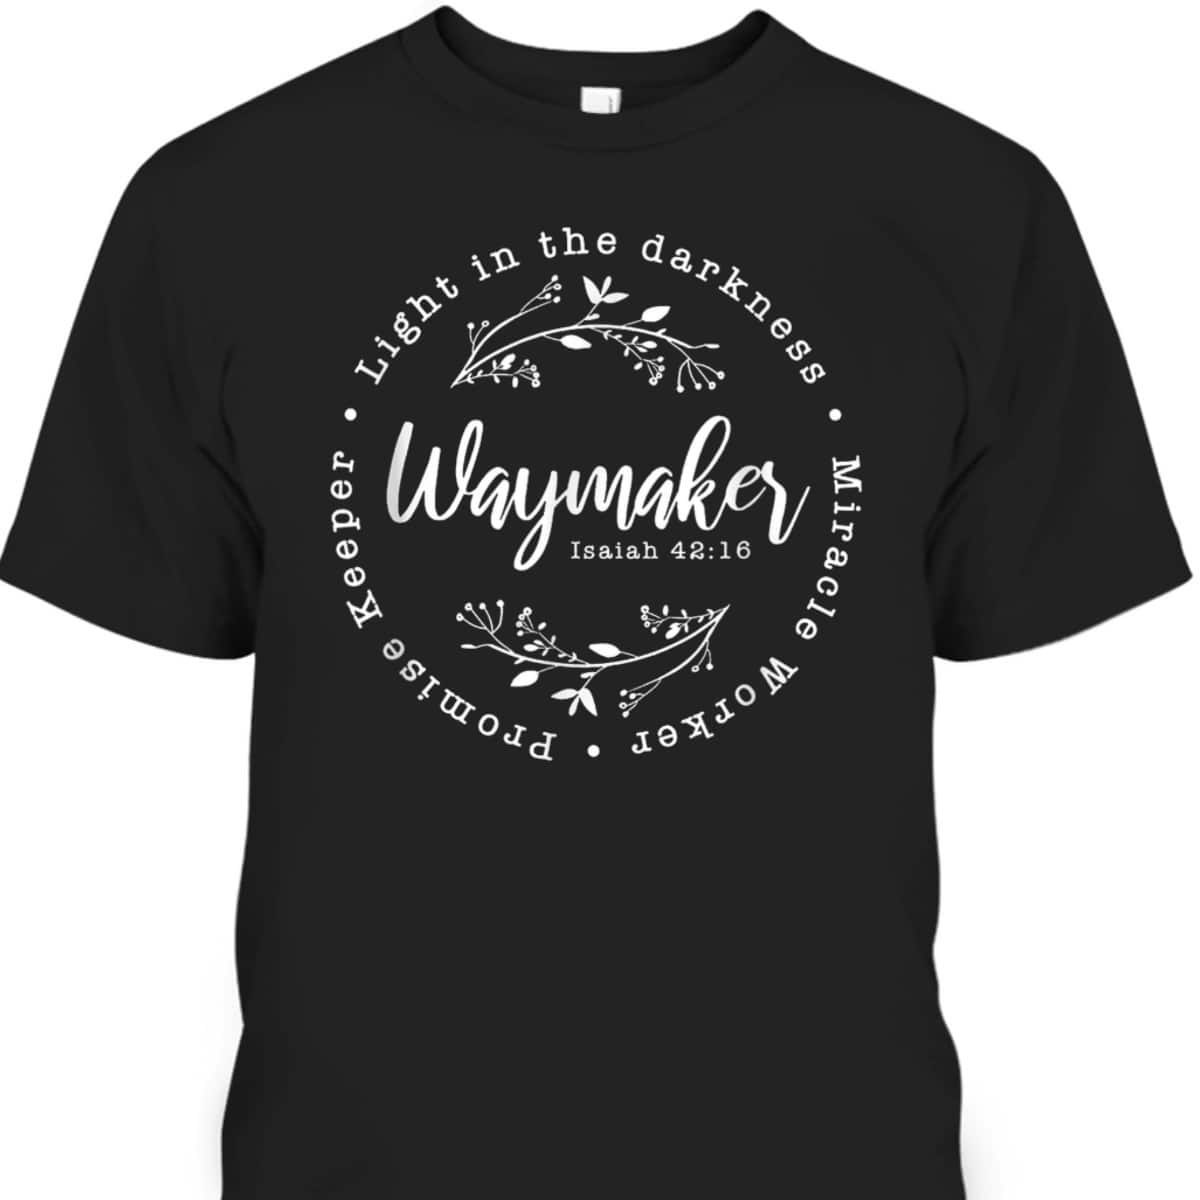 Promise Keeper Miracle Worker Waymaker Christian Faith T-Shirt